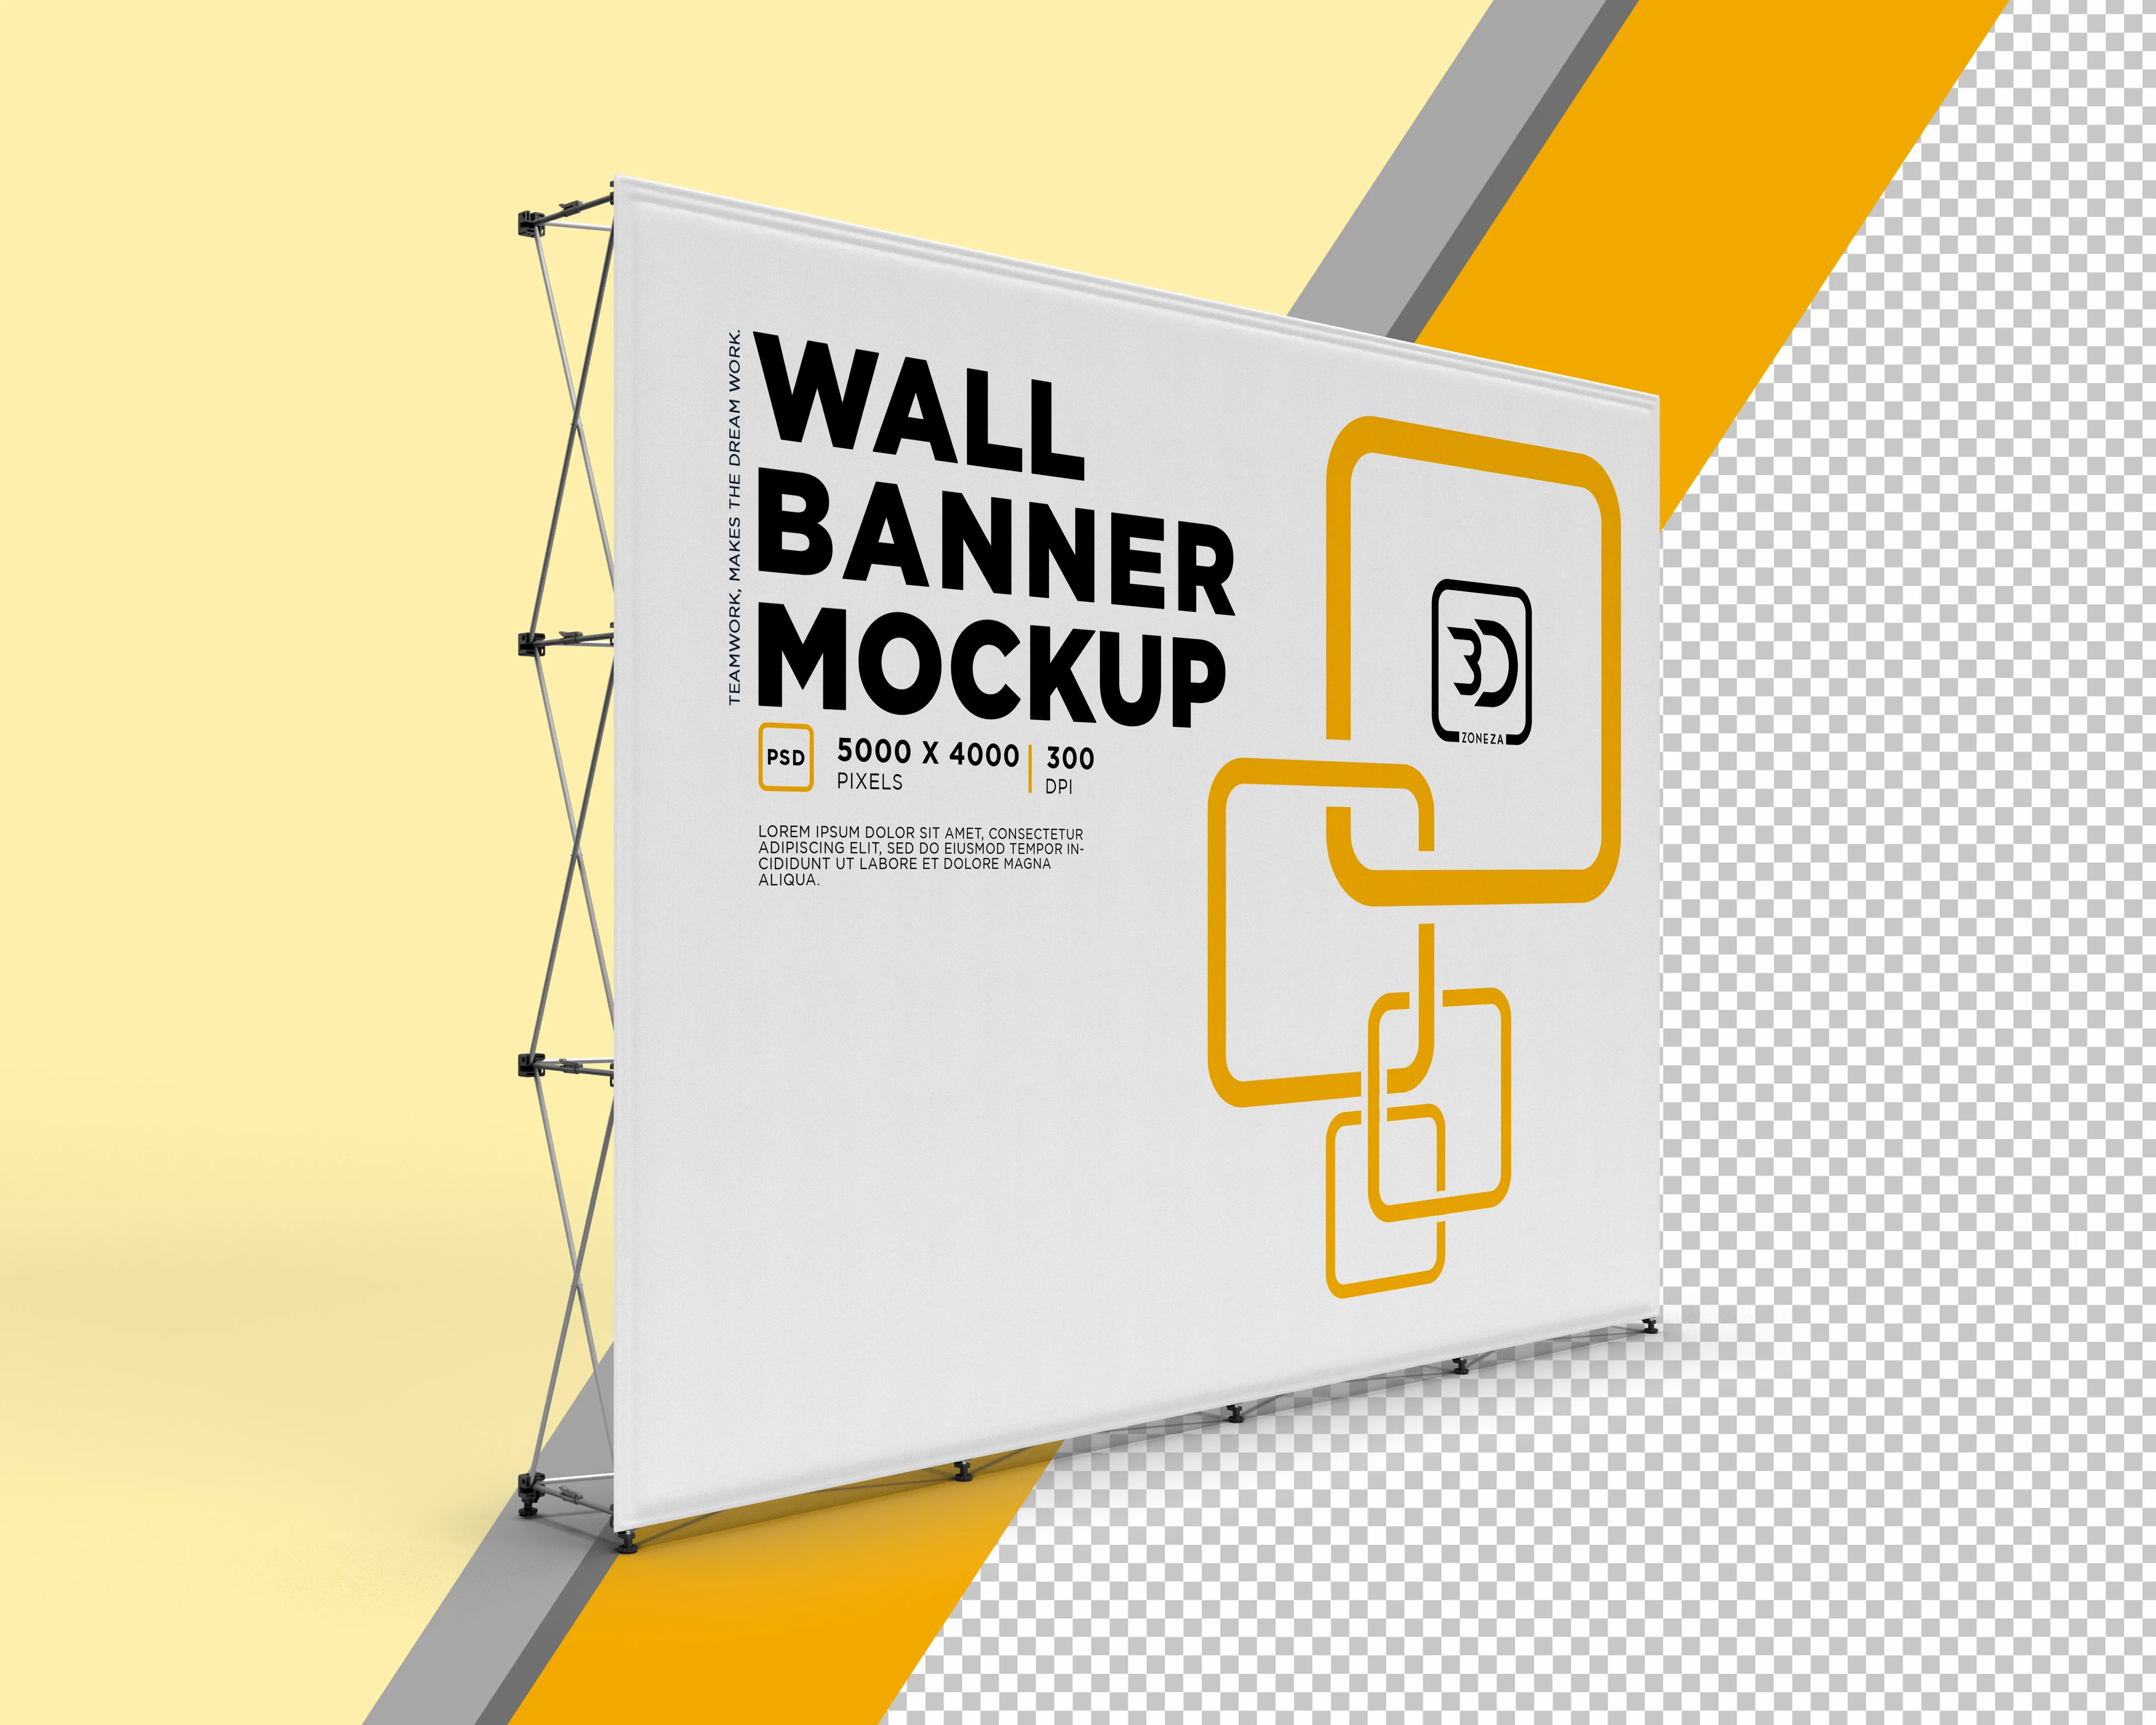 Perspective view of an exhibition graphic wall banner cloth psd mockup photo realistic